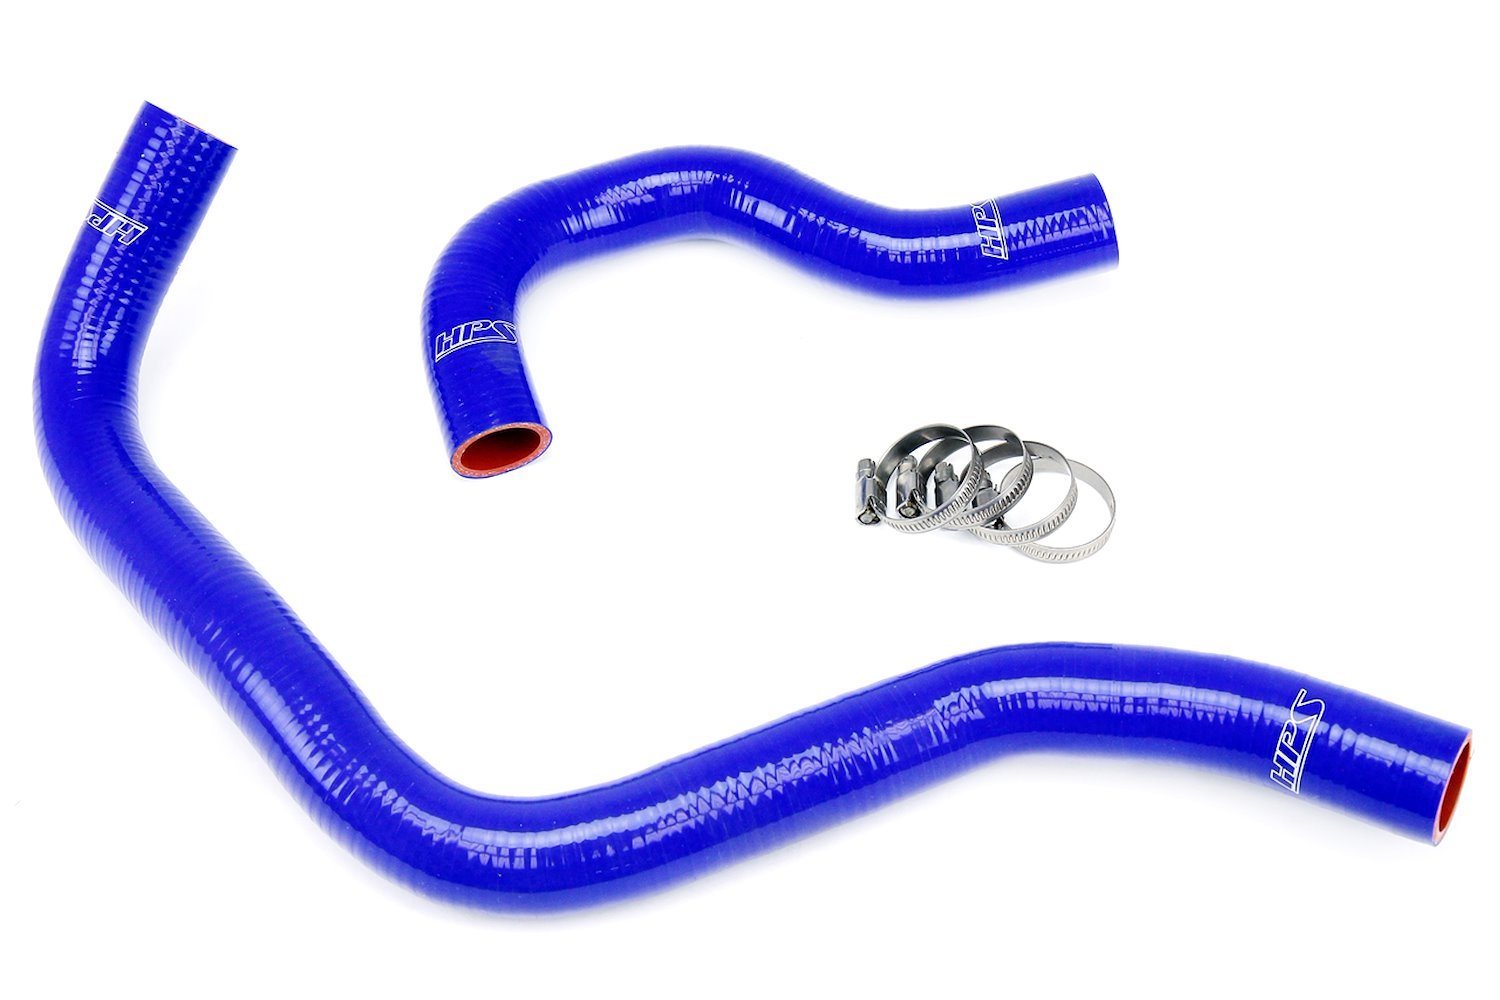 57-1002-BLUE Radiator Hose Kit, High-Temp 3-Ply Reinforced Silicone, Replace OEM Rubber Radiator Coolant Hoses